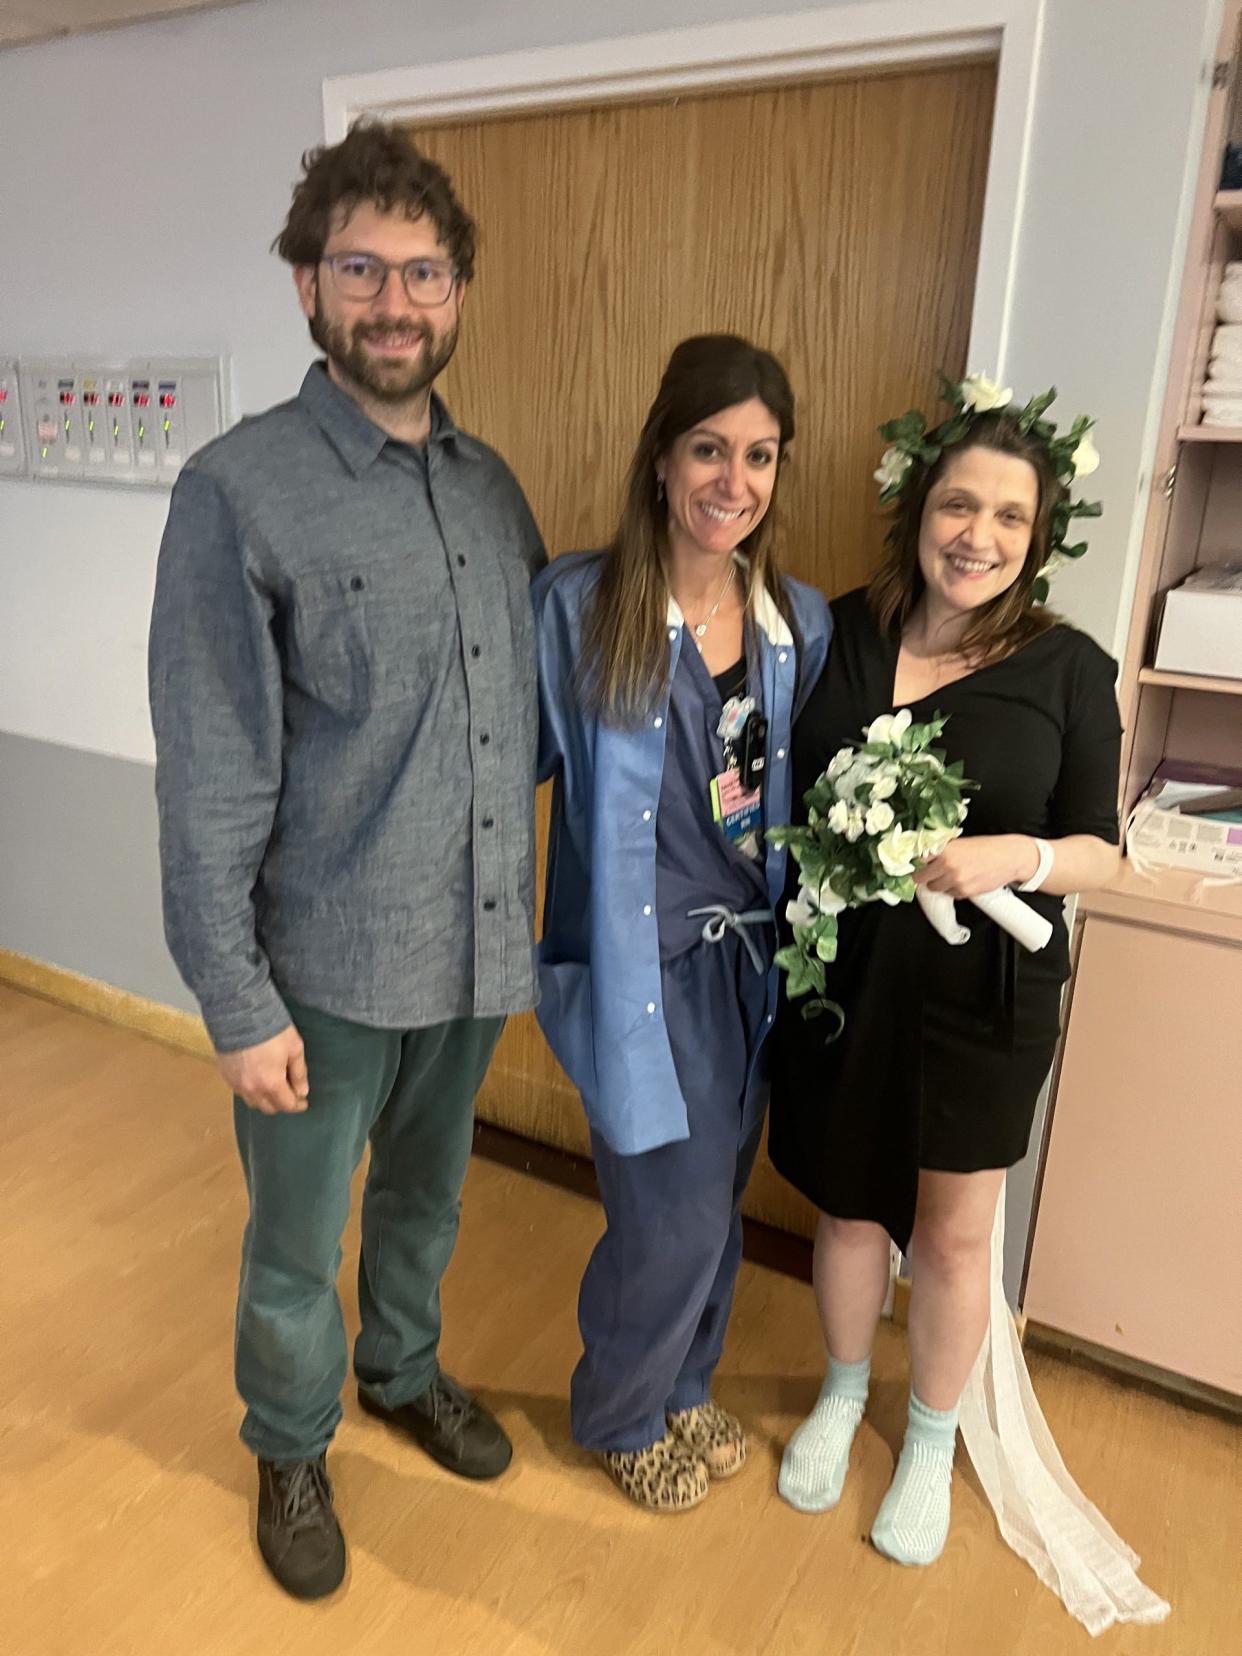 Newlyweds and new parents Michael and Nora stand with nurse Valerie Goodwin on their wedding day at Northern Westchester Hospital.